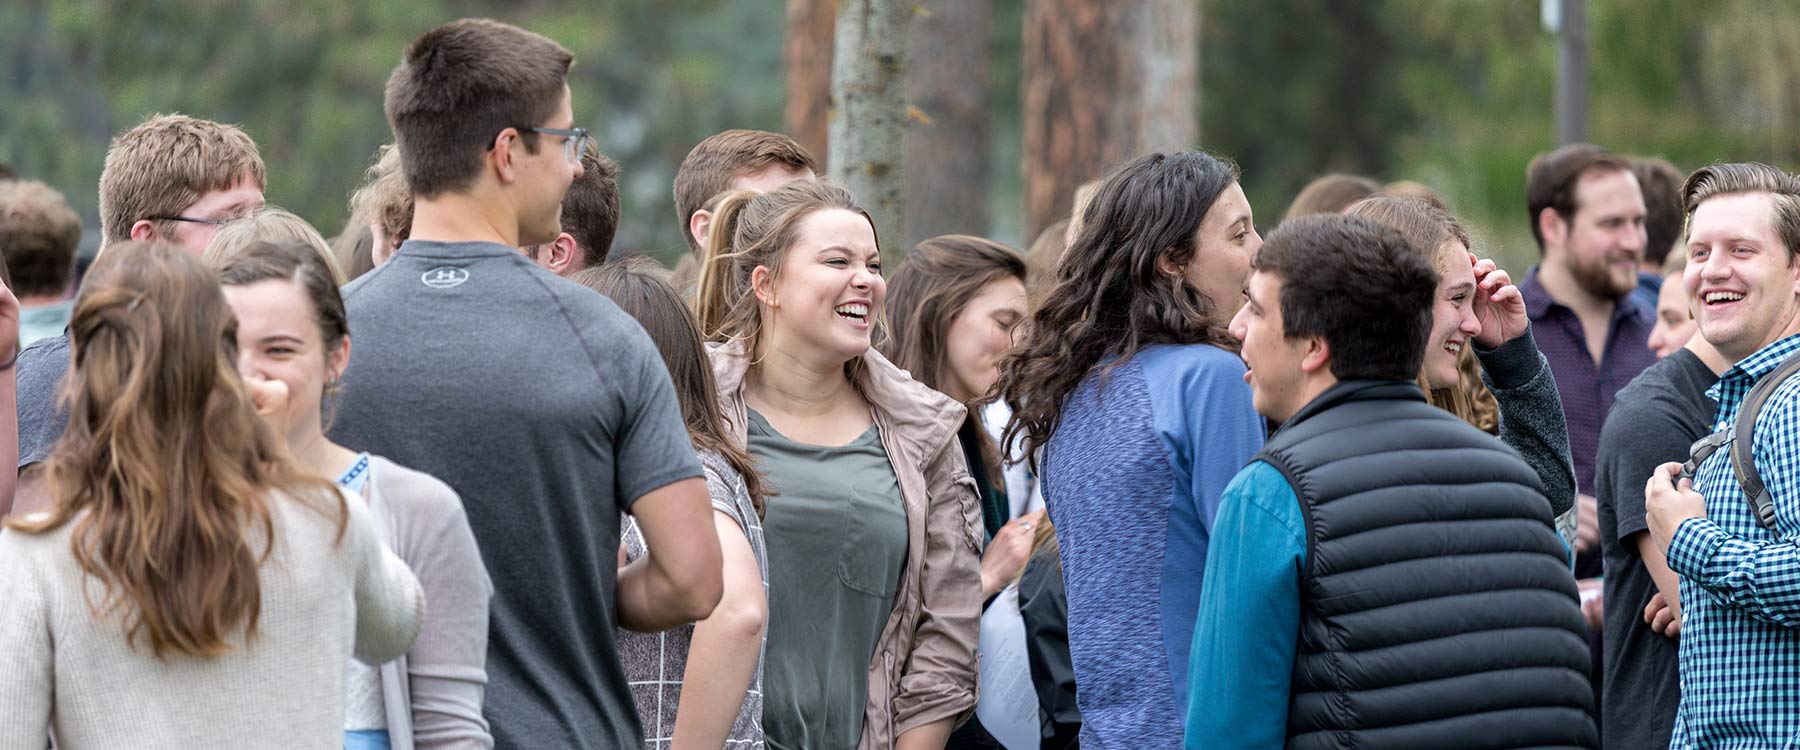 A large group of students smiling and conversing outdoors at a campus event beneath pine trees.